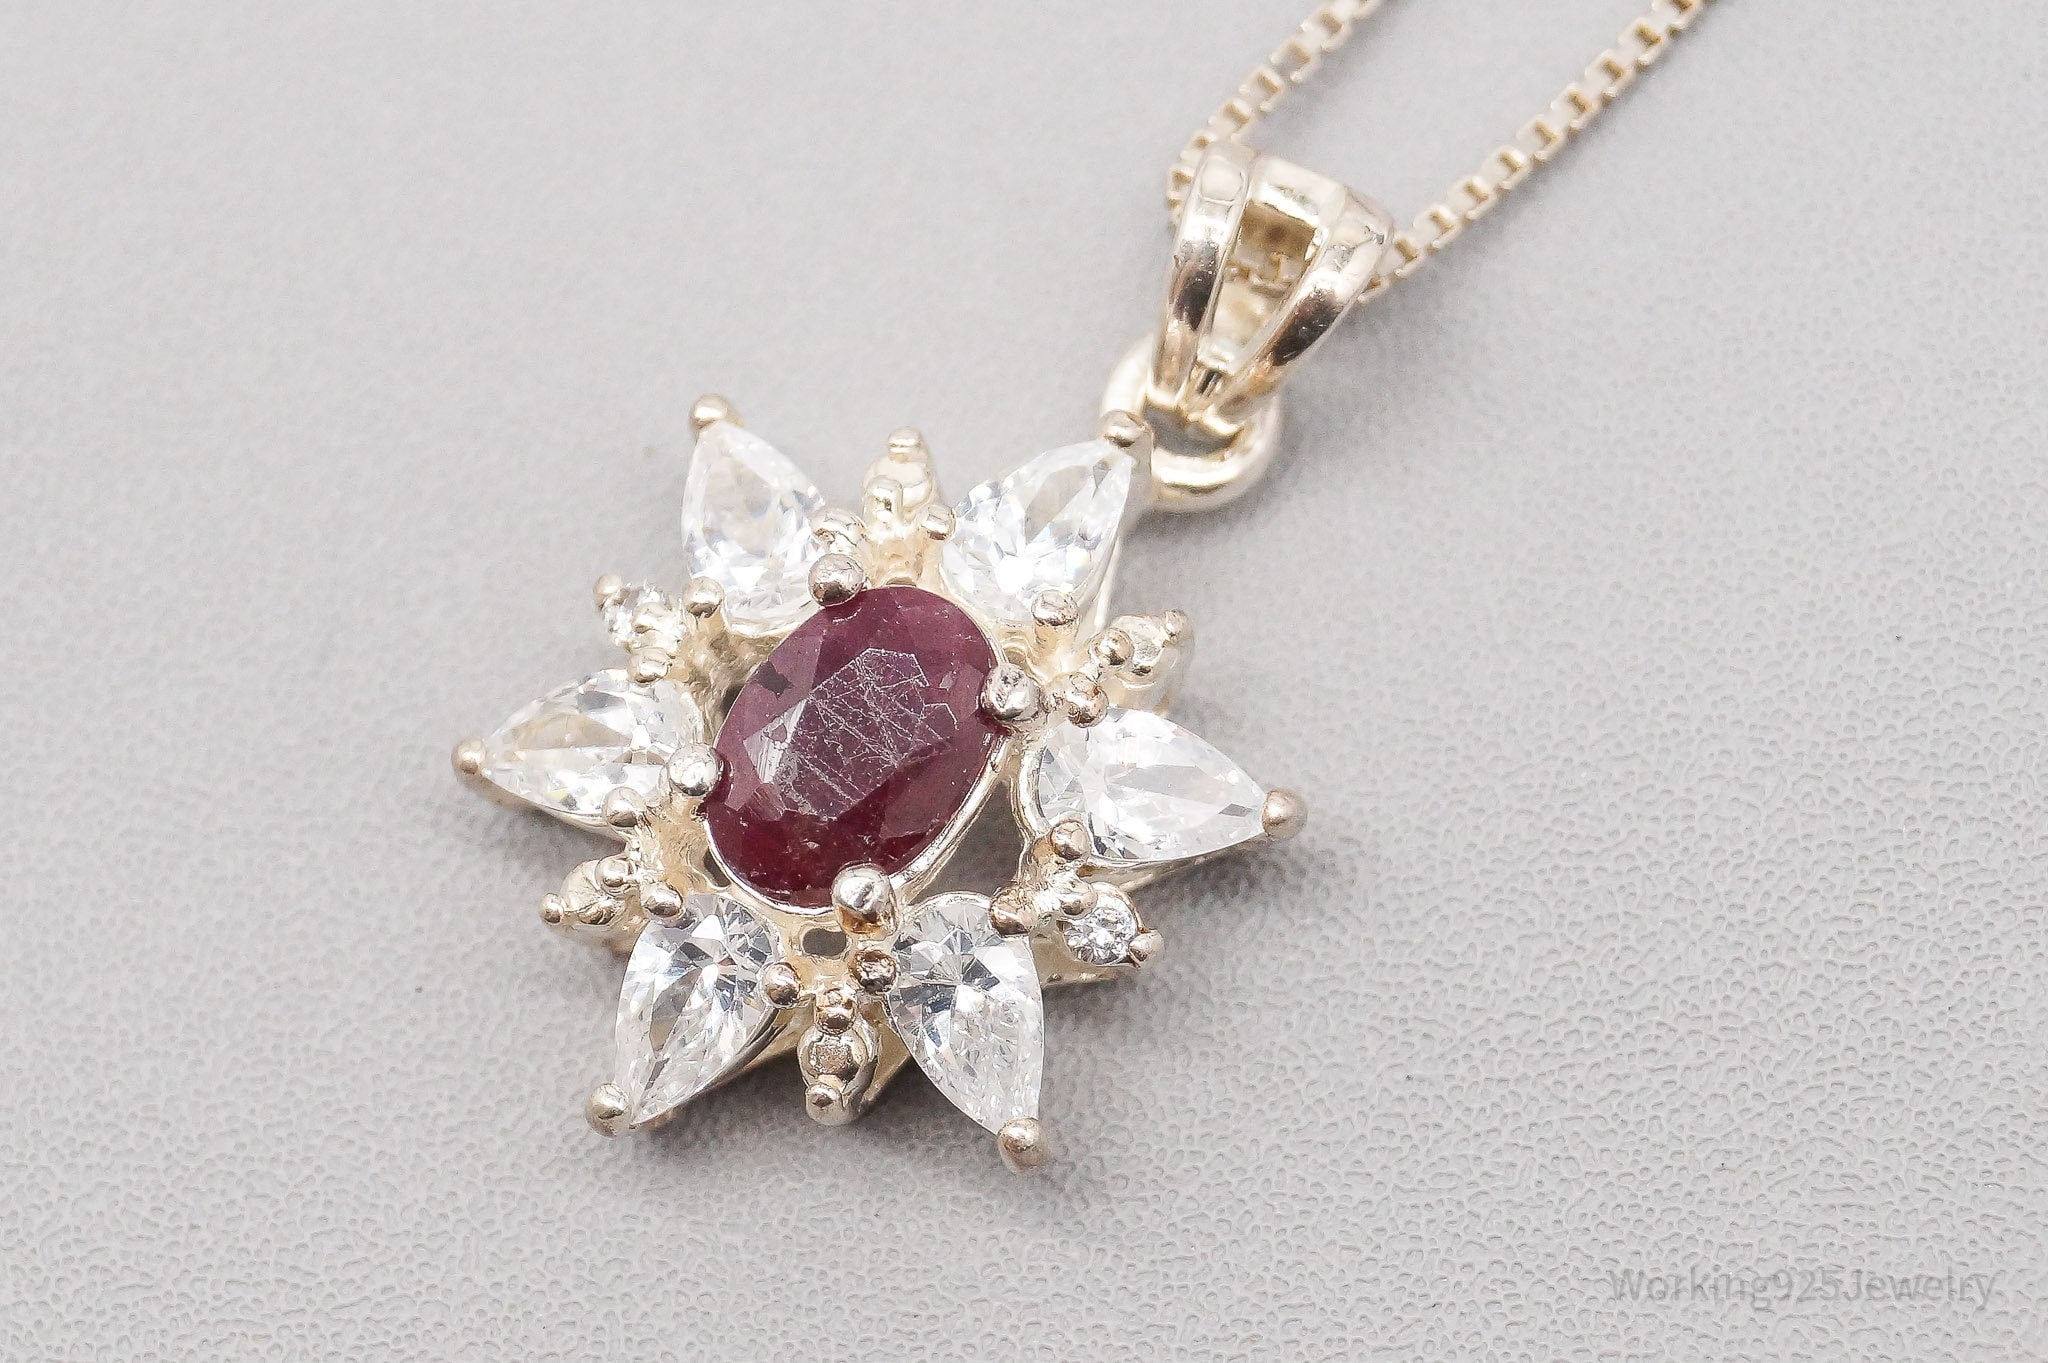 Vintage Raw Cut Ruby Cubic Zirconia Flower Sterling Silver Necklace 18"